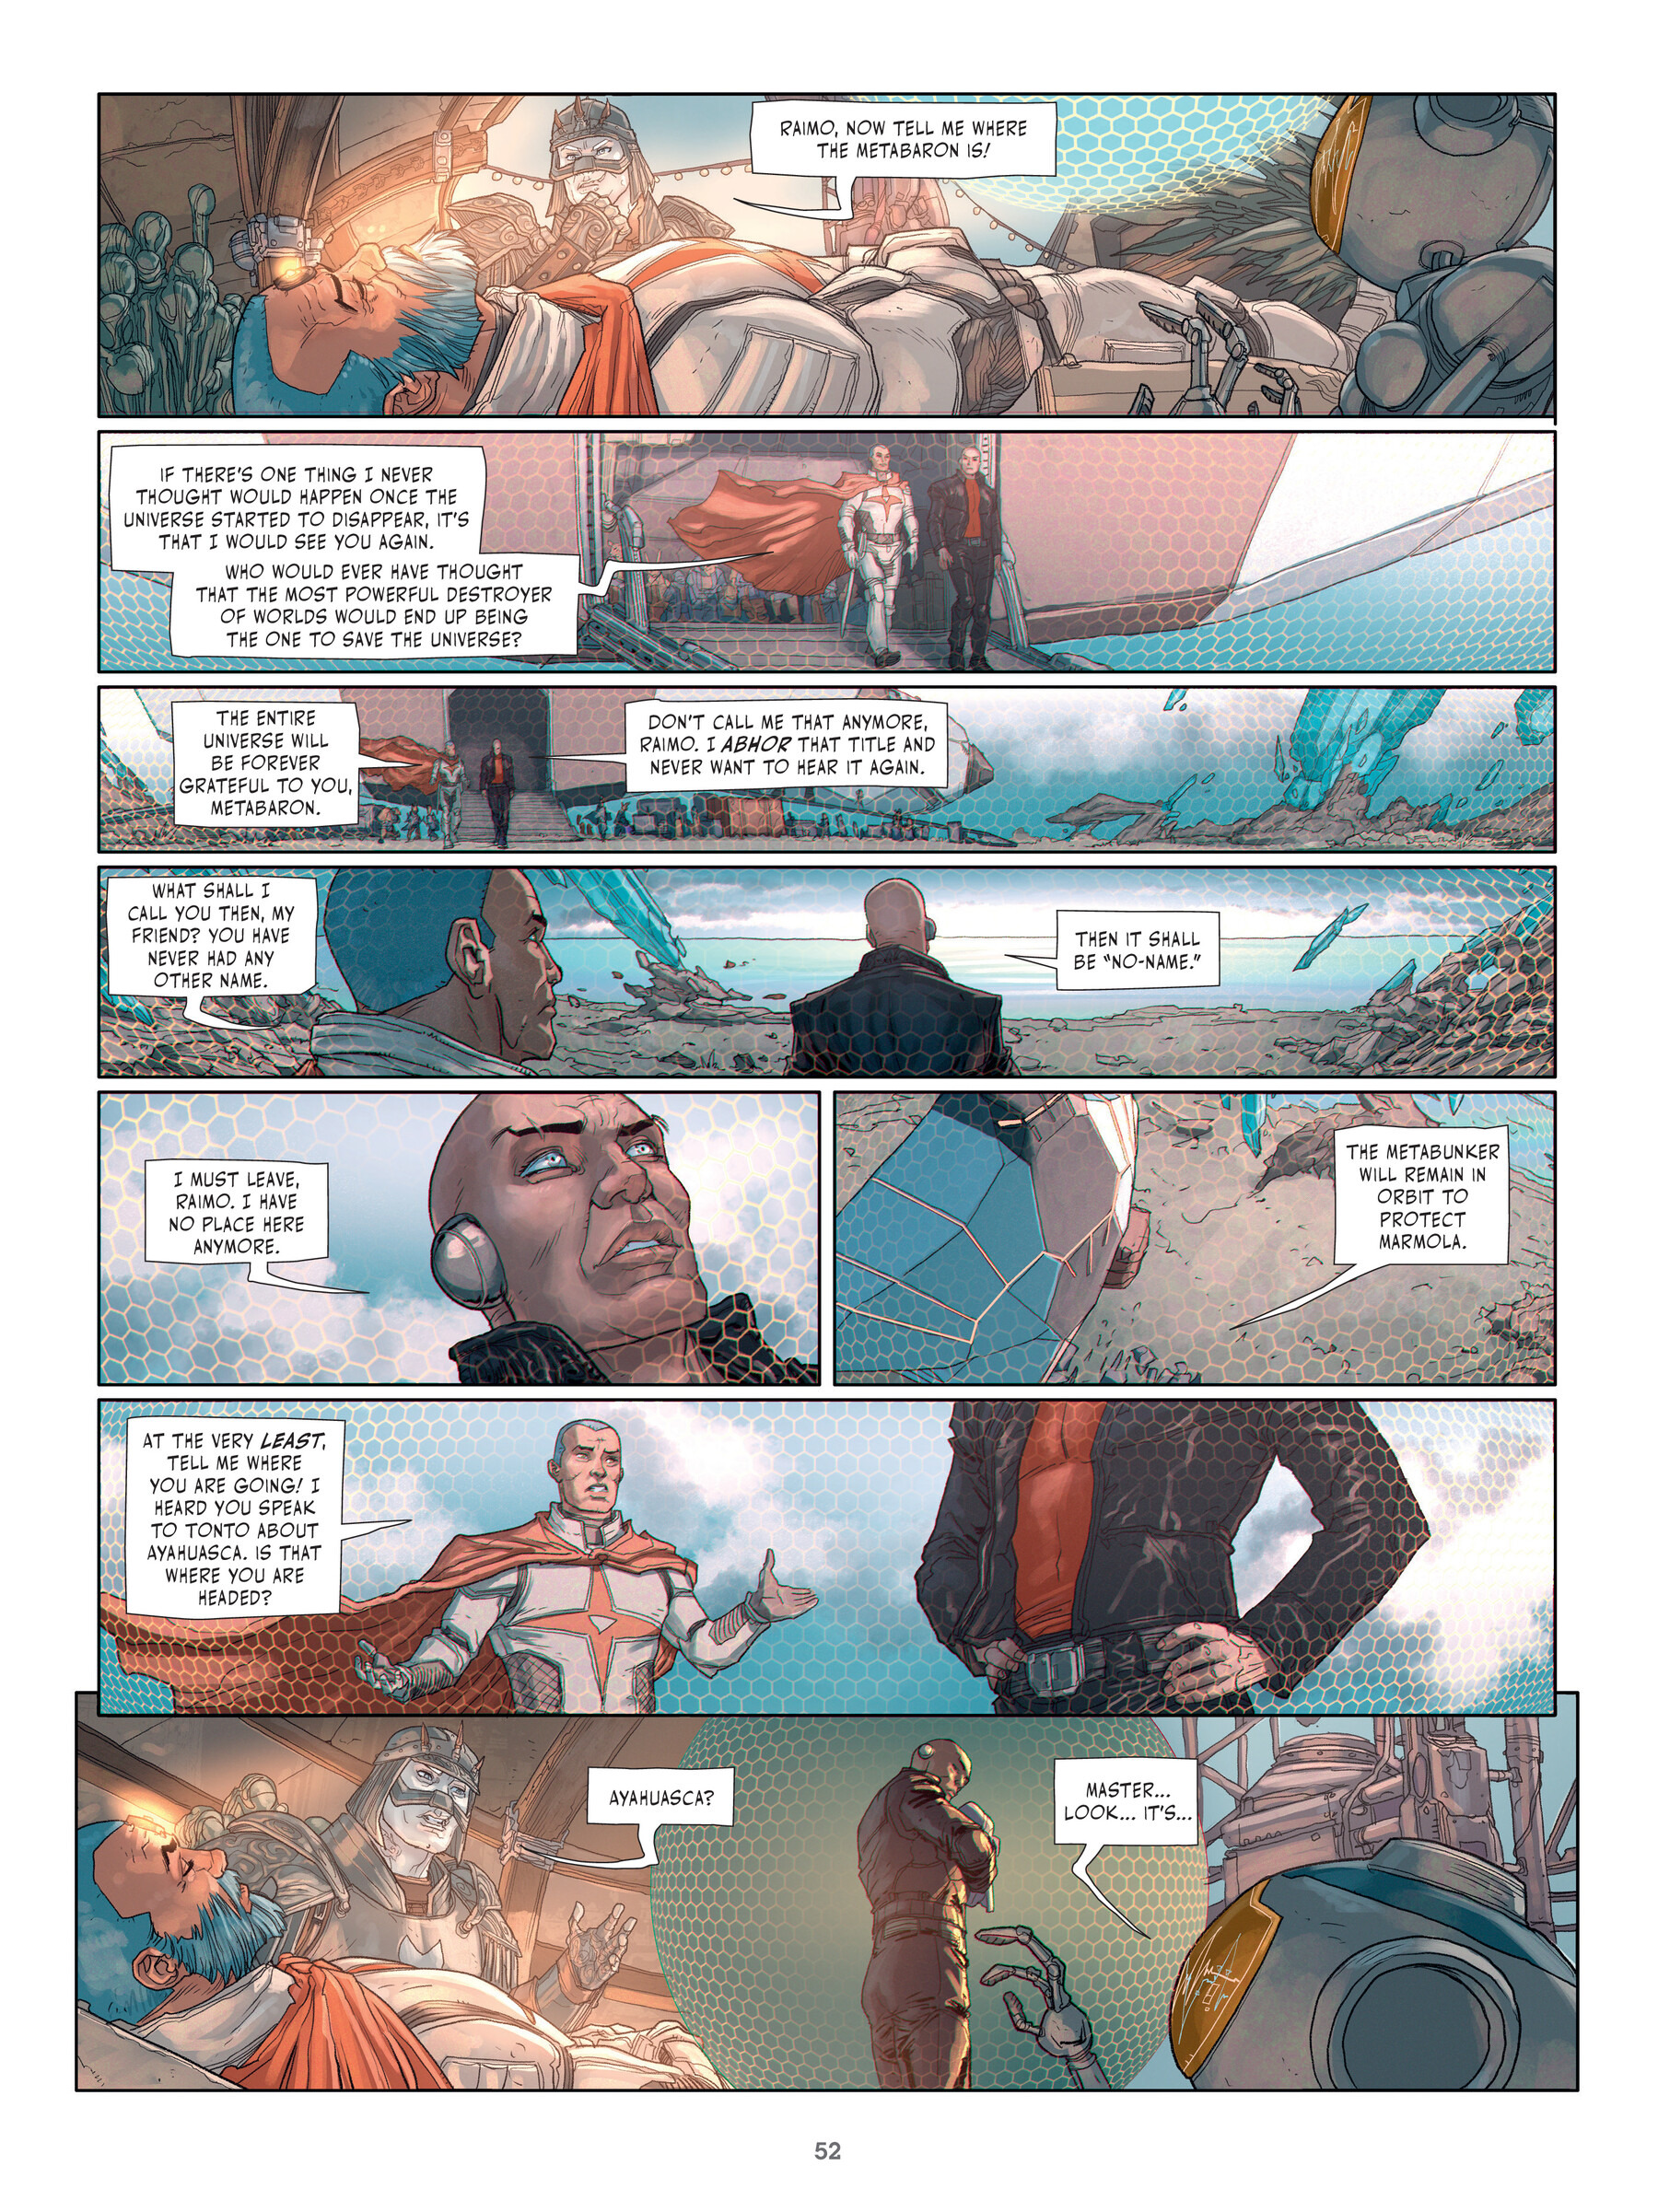 Read online The Metabaron comic -  Issue #7 - 51